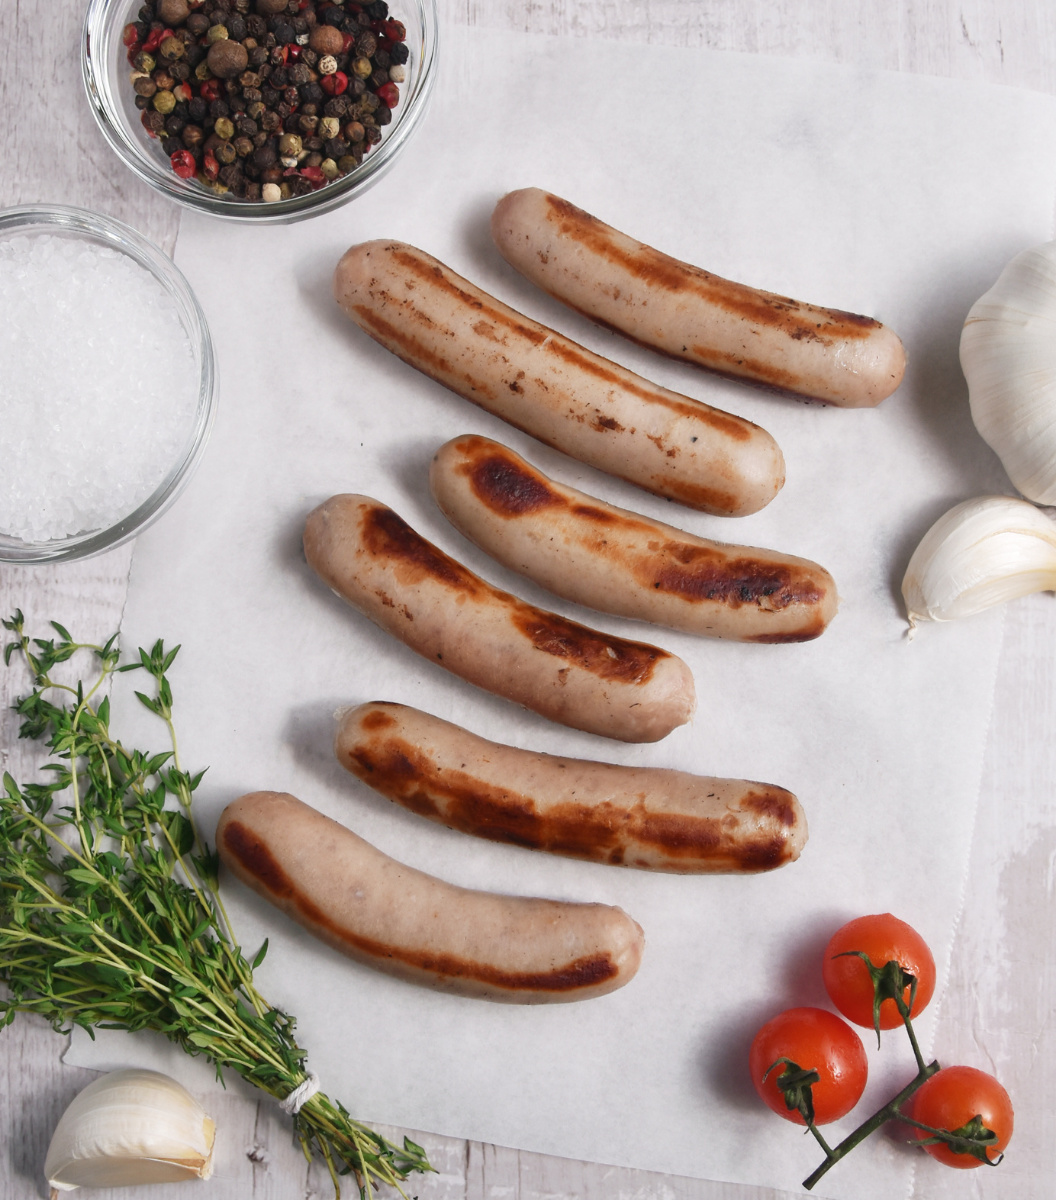 Grilled Wicks Manor English Pork Sausage Chipolatas with garlic, red grade tomato and spice by side